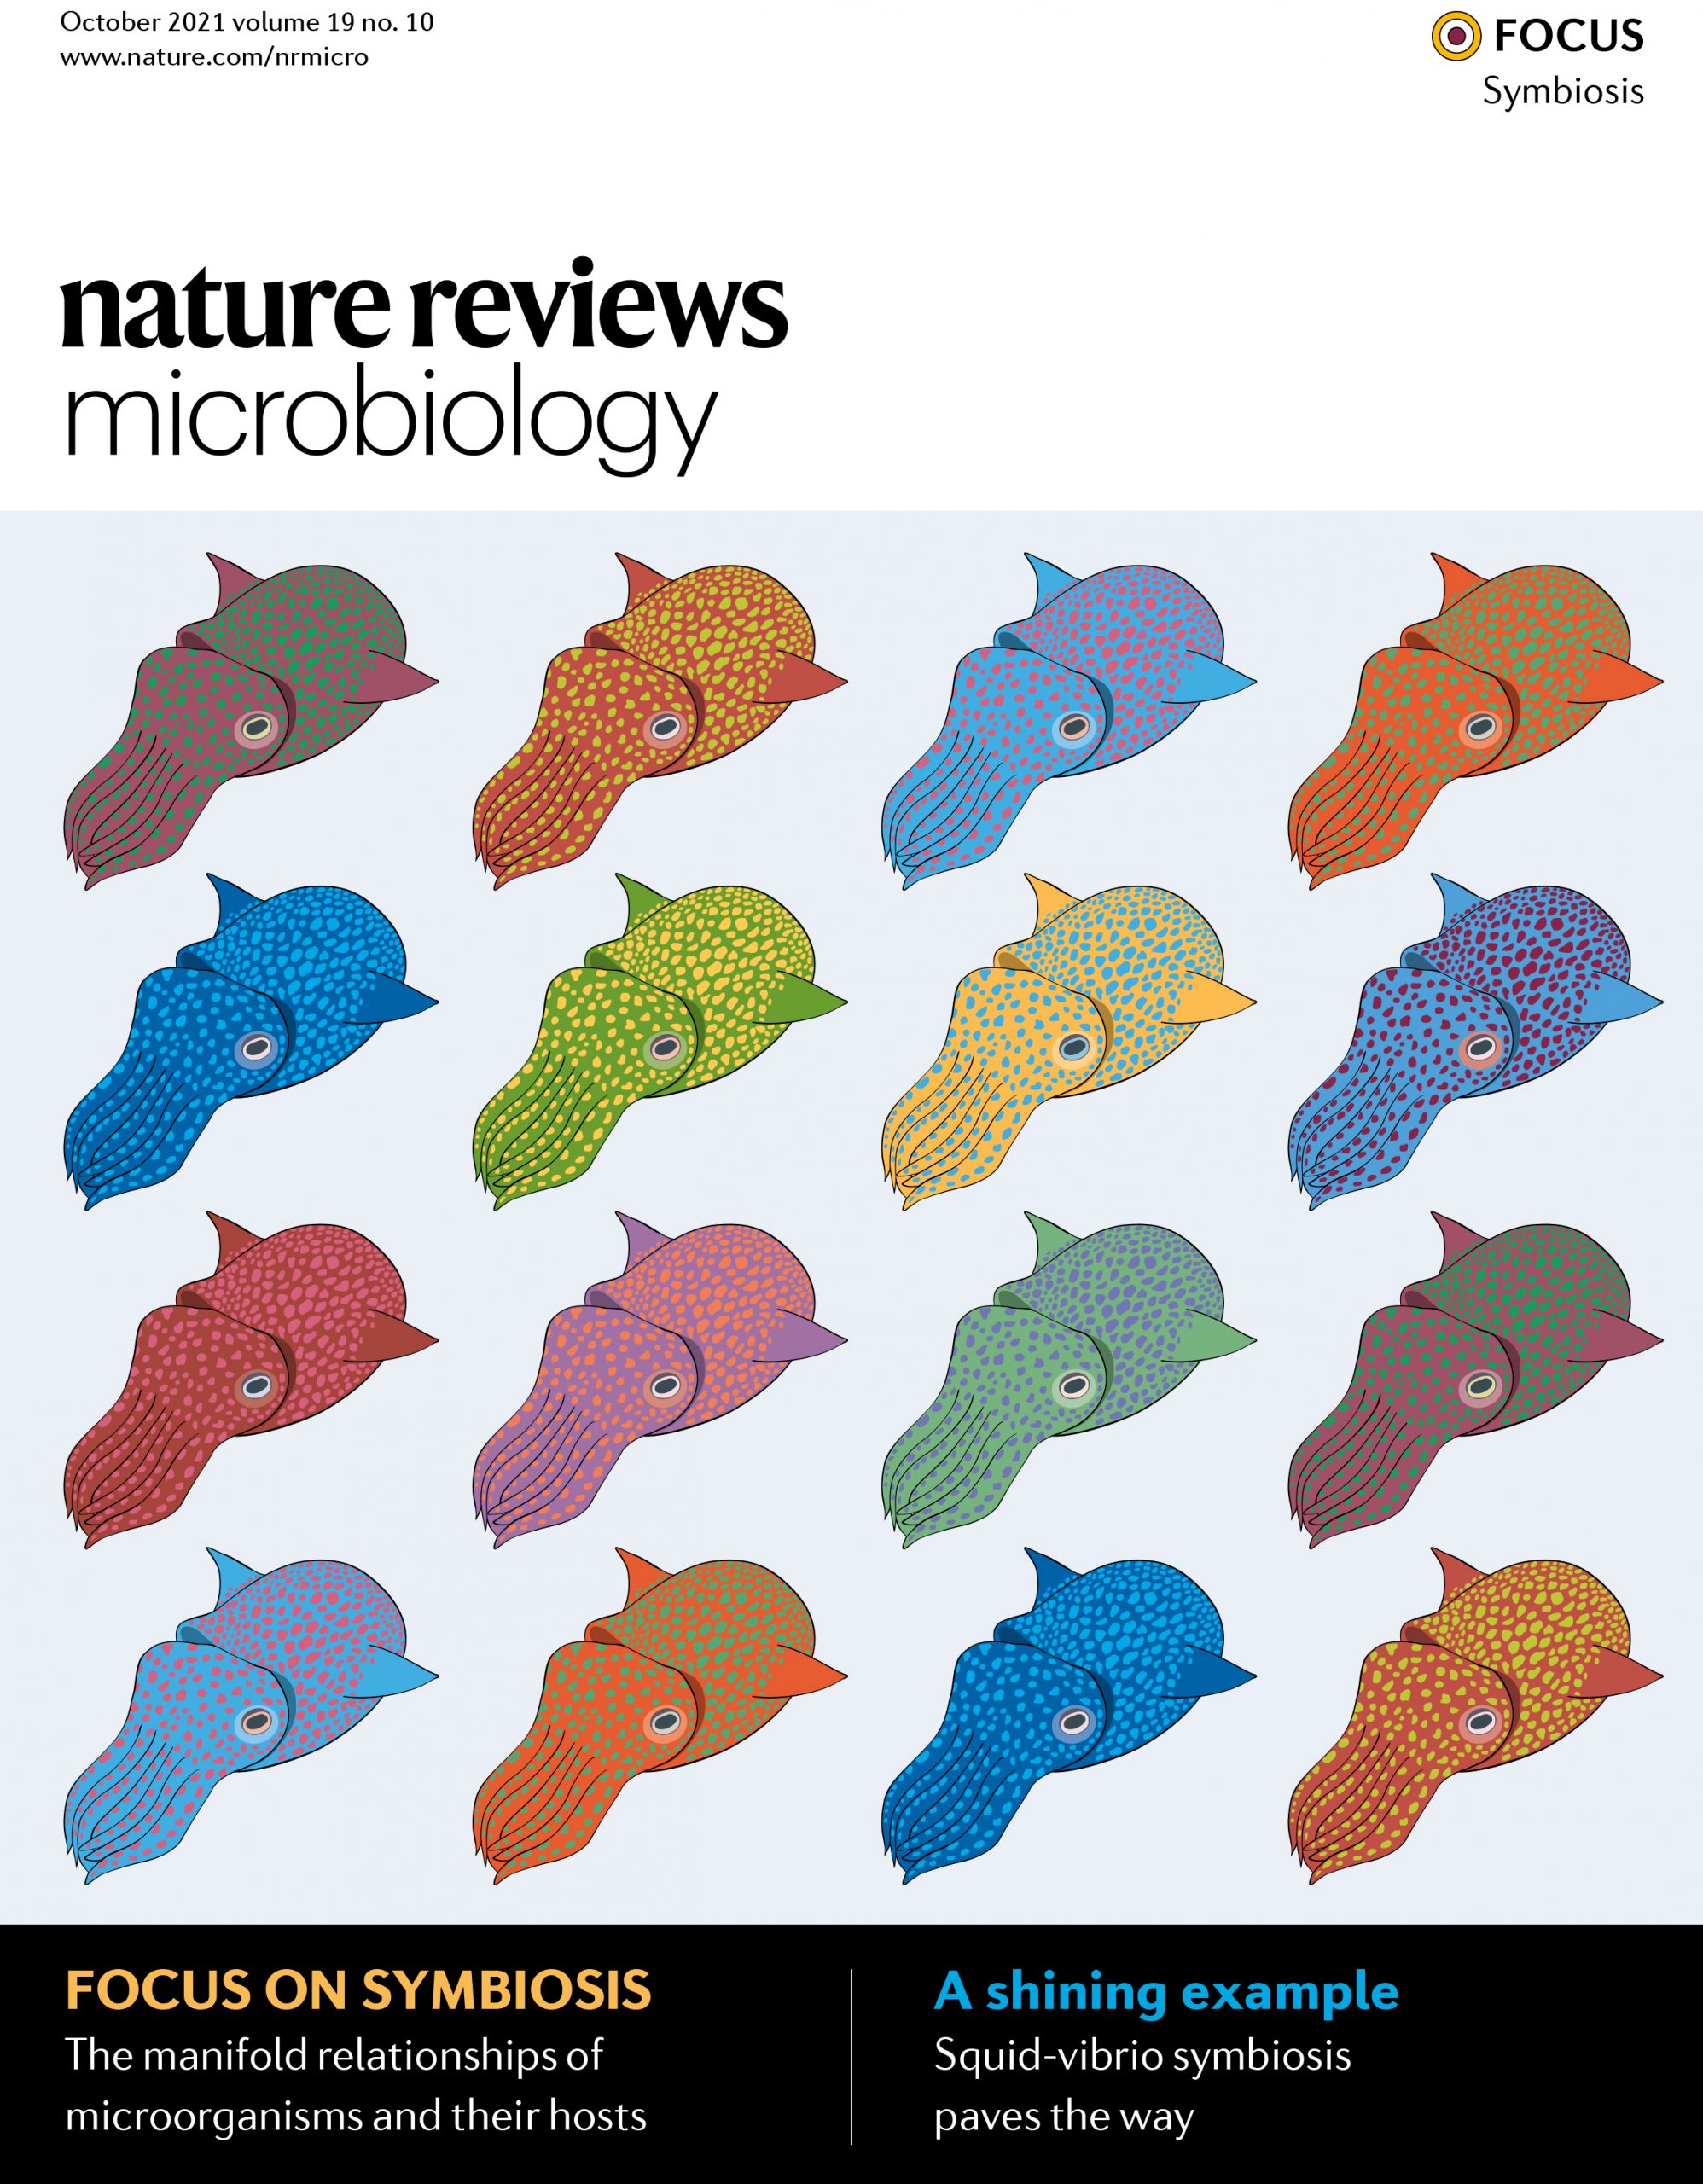 Nyholm Lab Article Featured on of Nature Reviews Microbiology | Department of Molecular and Biology